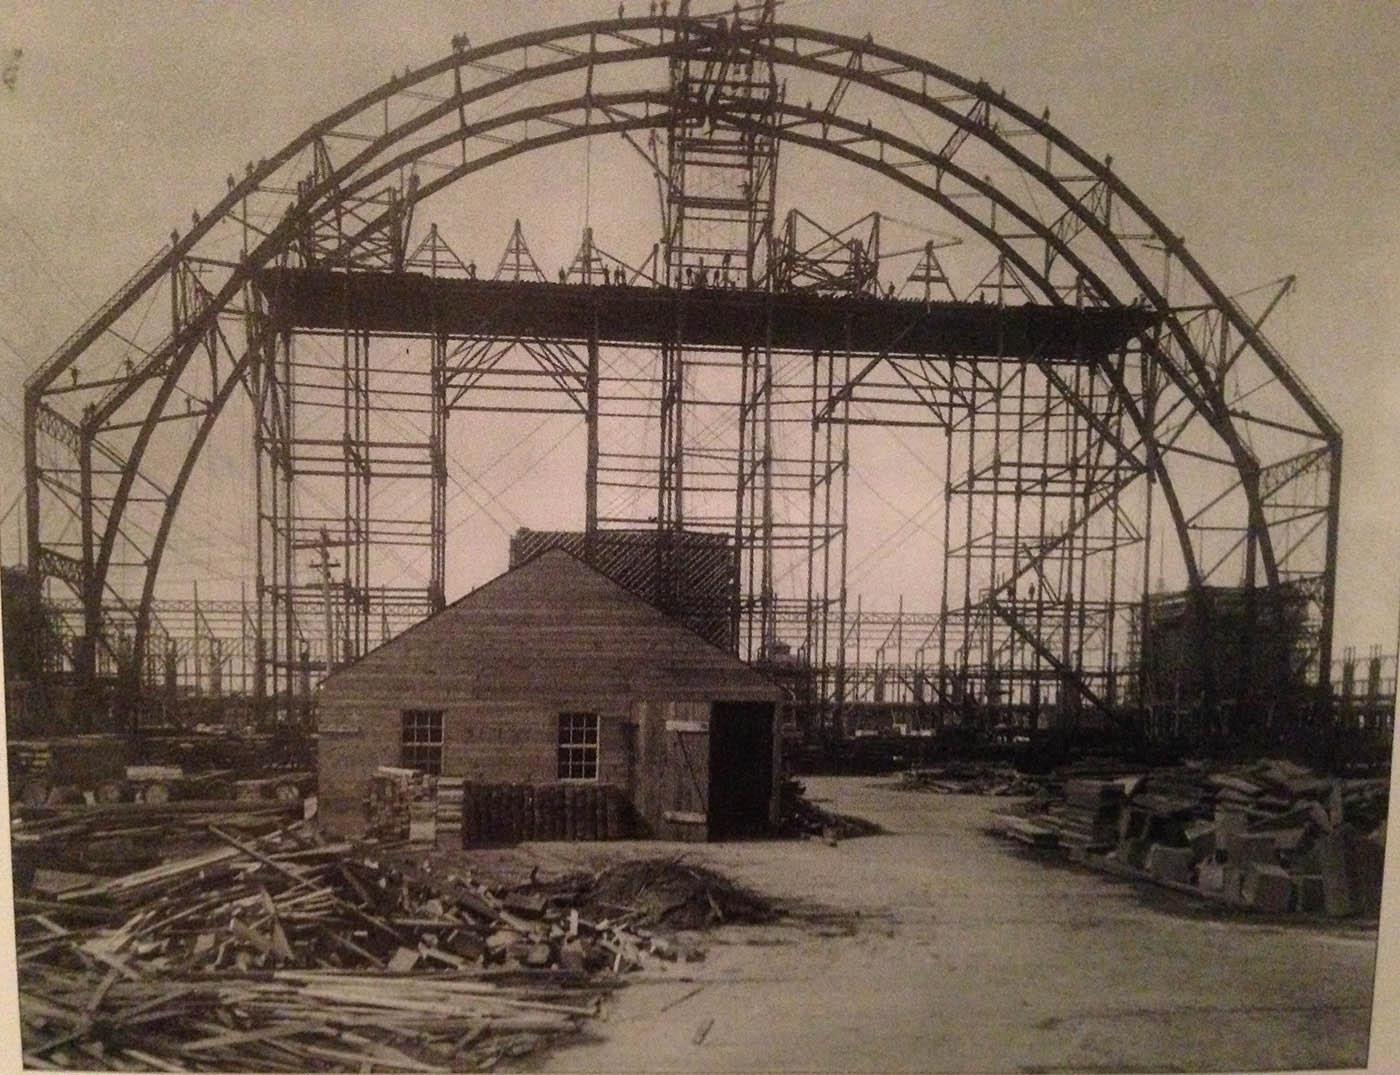 A shack standing amidst the construction of the 1893 World's Columbian Exposition in Chicago